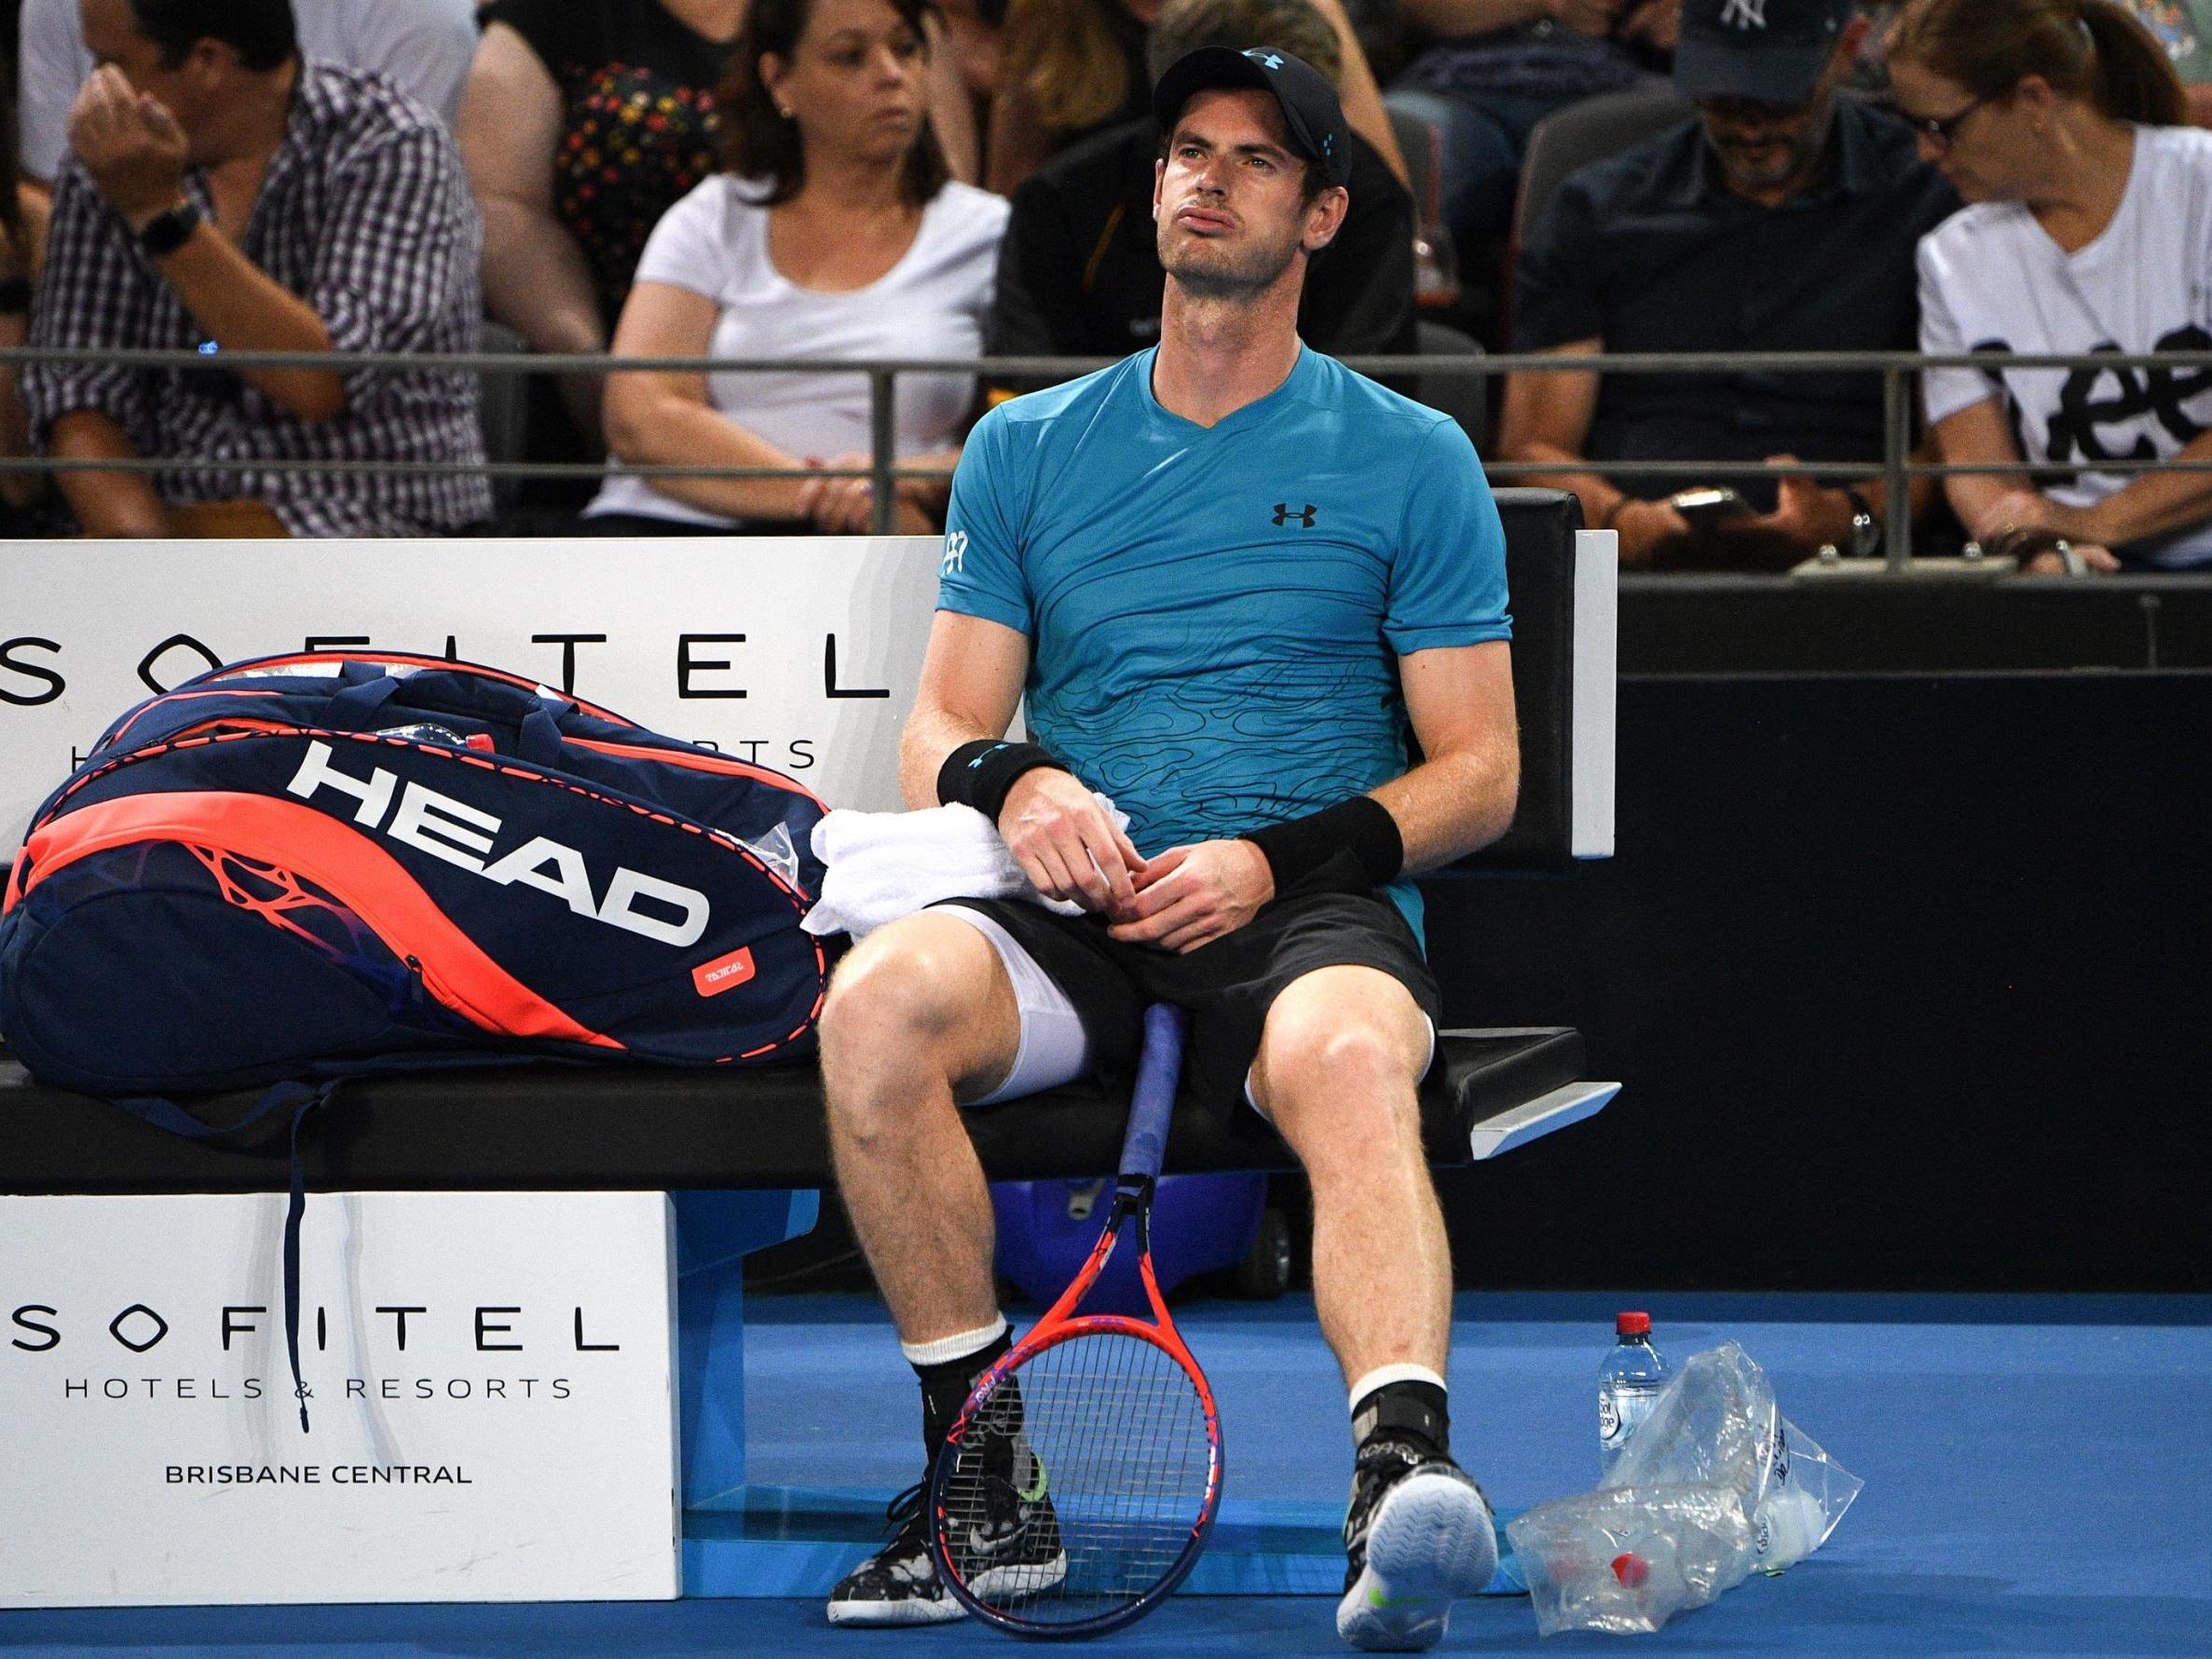 Andy Murray went out in the second round of the competition